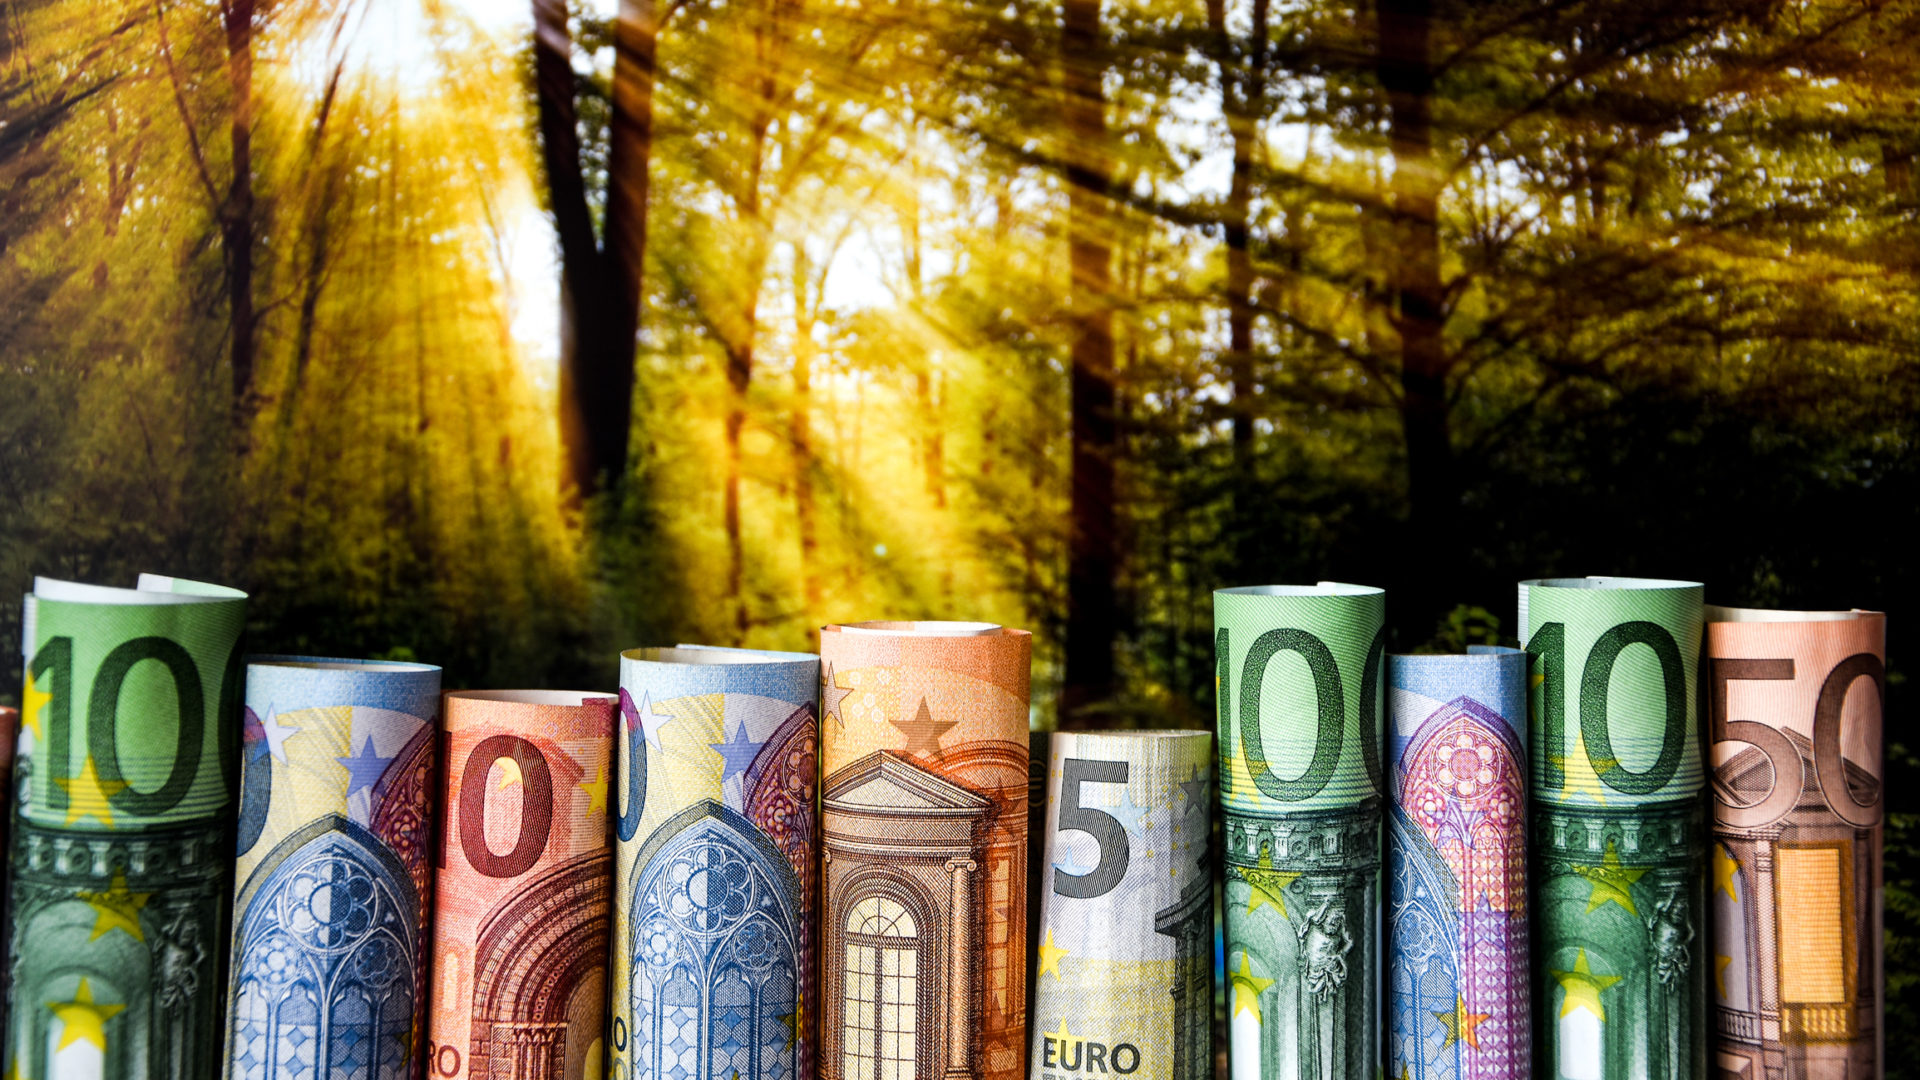 Euro bills in front of a forrest